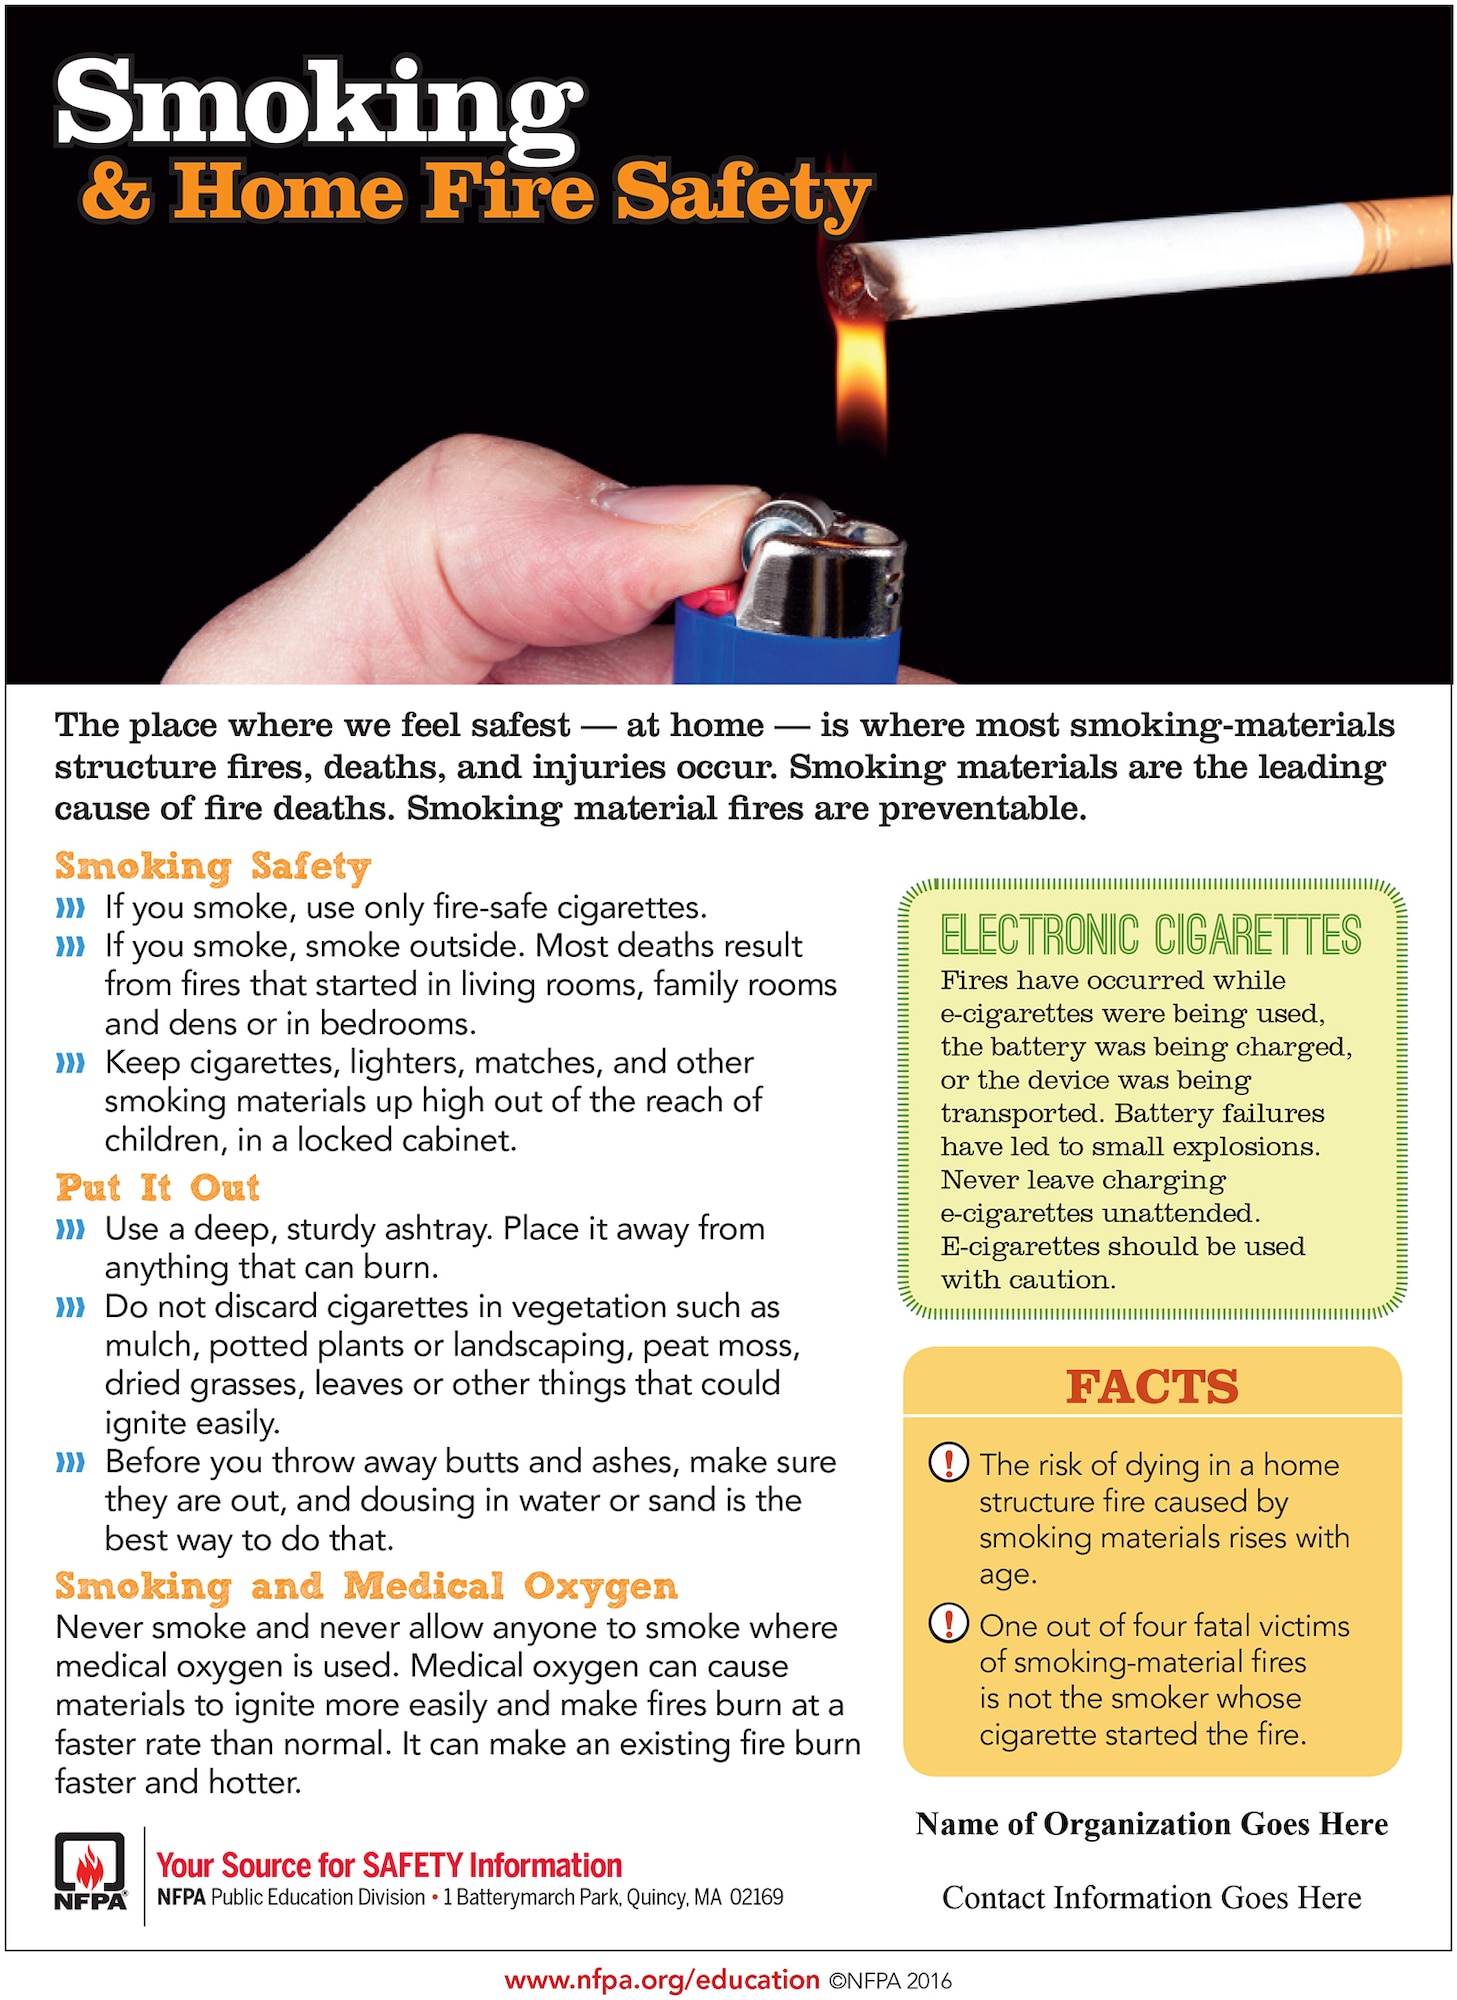 In the United States, smoking materials are the leading cause of fire deaths, as reported by the U.S. Fire Administration. Some significant deterrents in combating these unnecessary deaths are smoke alarms, smoldering resistant bedding and upholstered furniture. Smoking material fires are preventable.